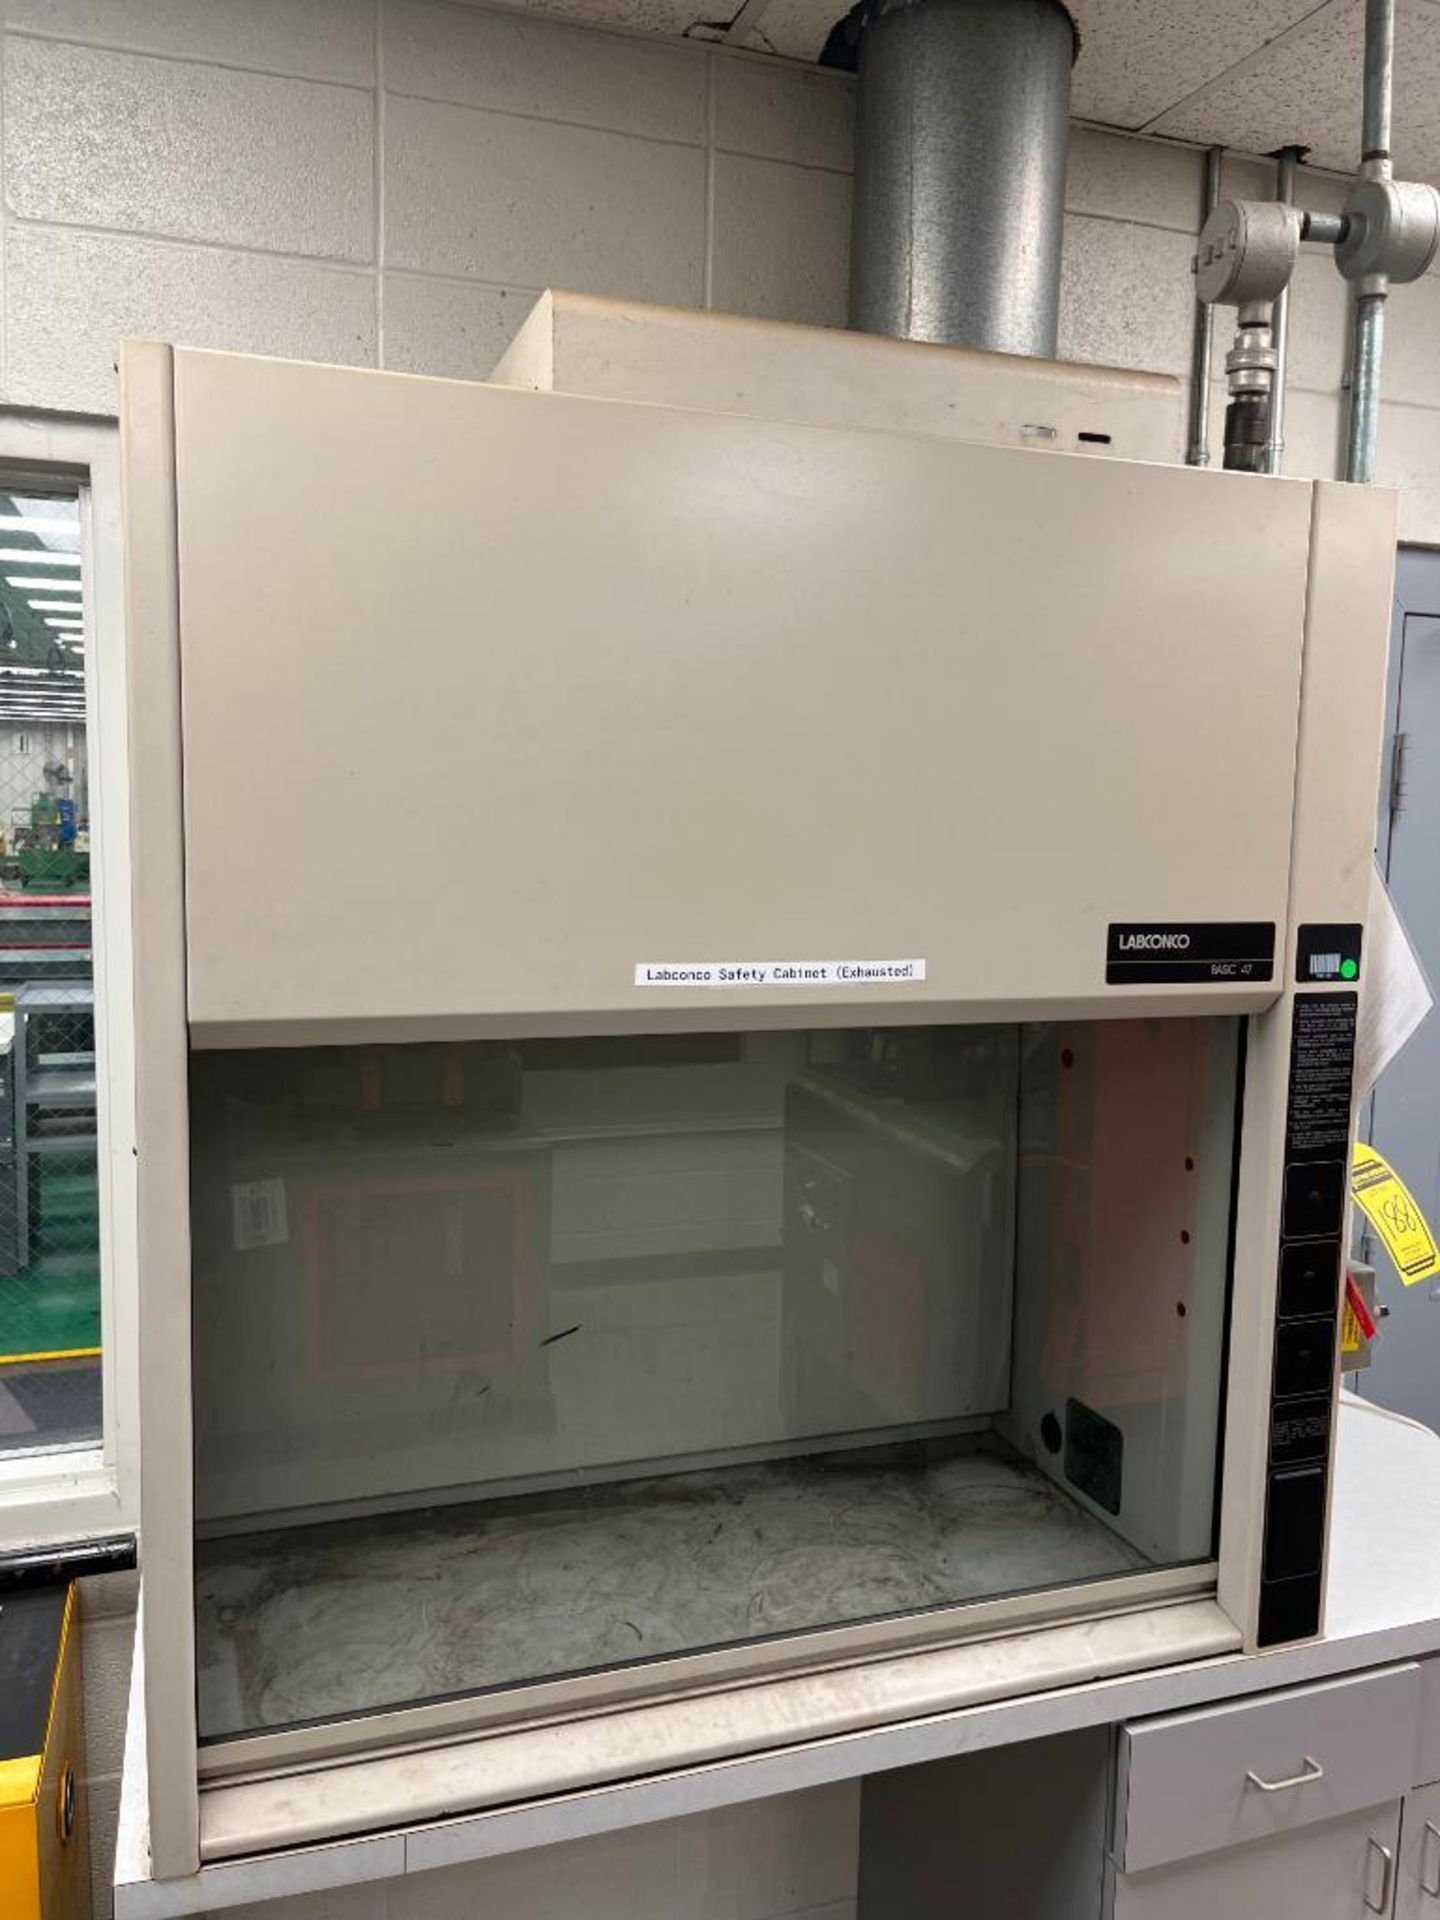 Labconco Safety Cabinet